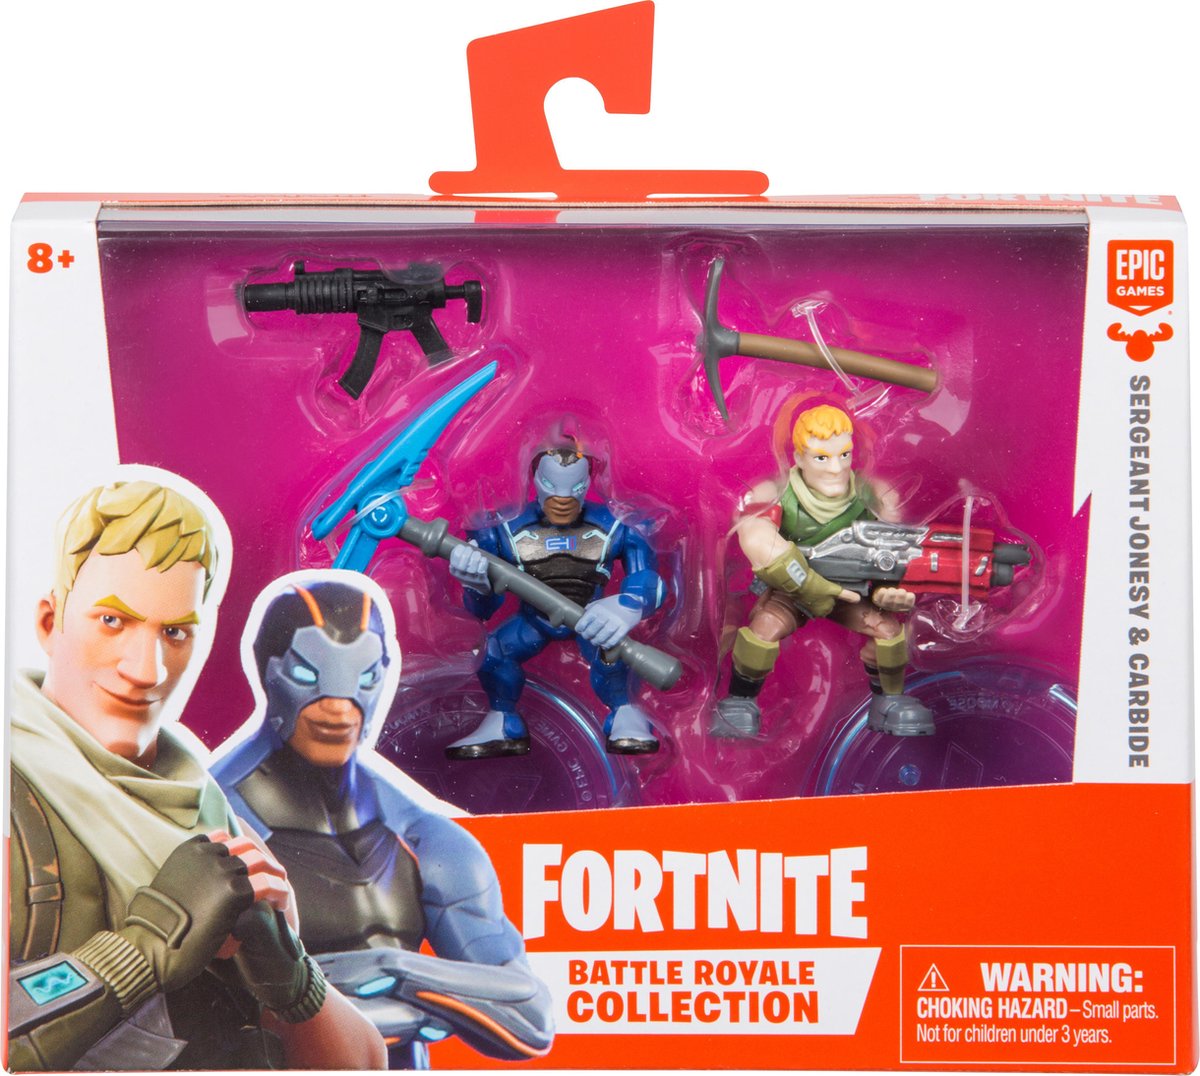 Fortnite "Battle Royale Collection" Series 1 figure duo pack - Sergeant Jonesy & Carbide